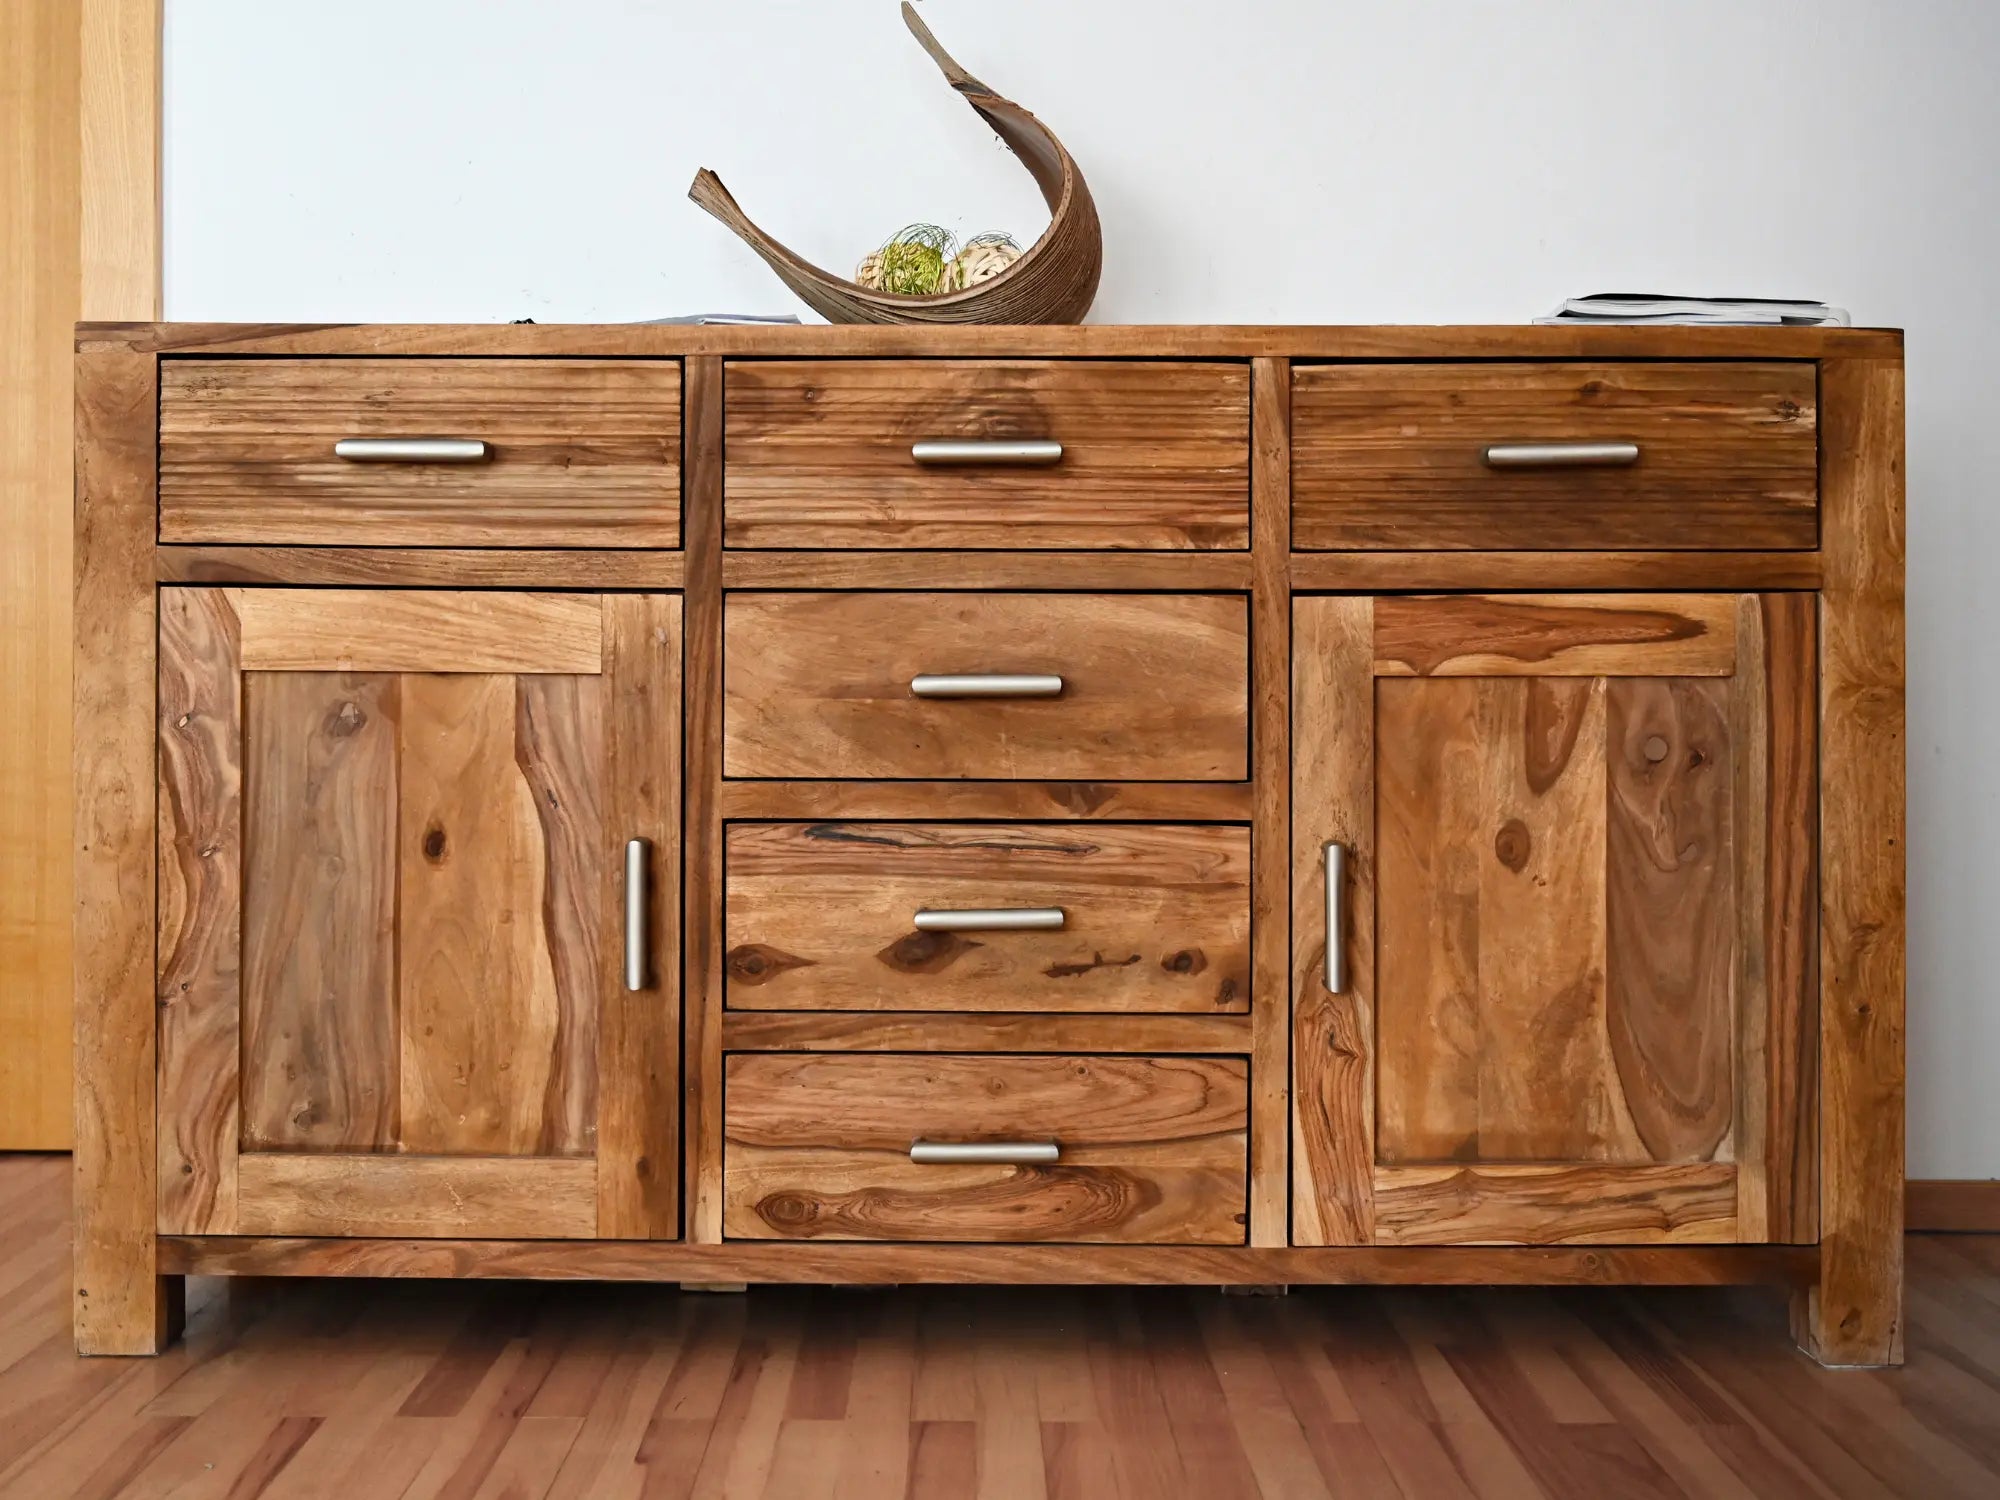 Best Wood Types for Furniture